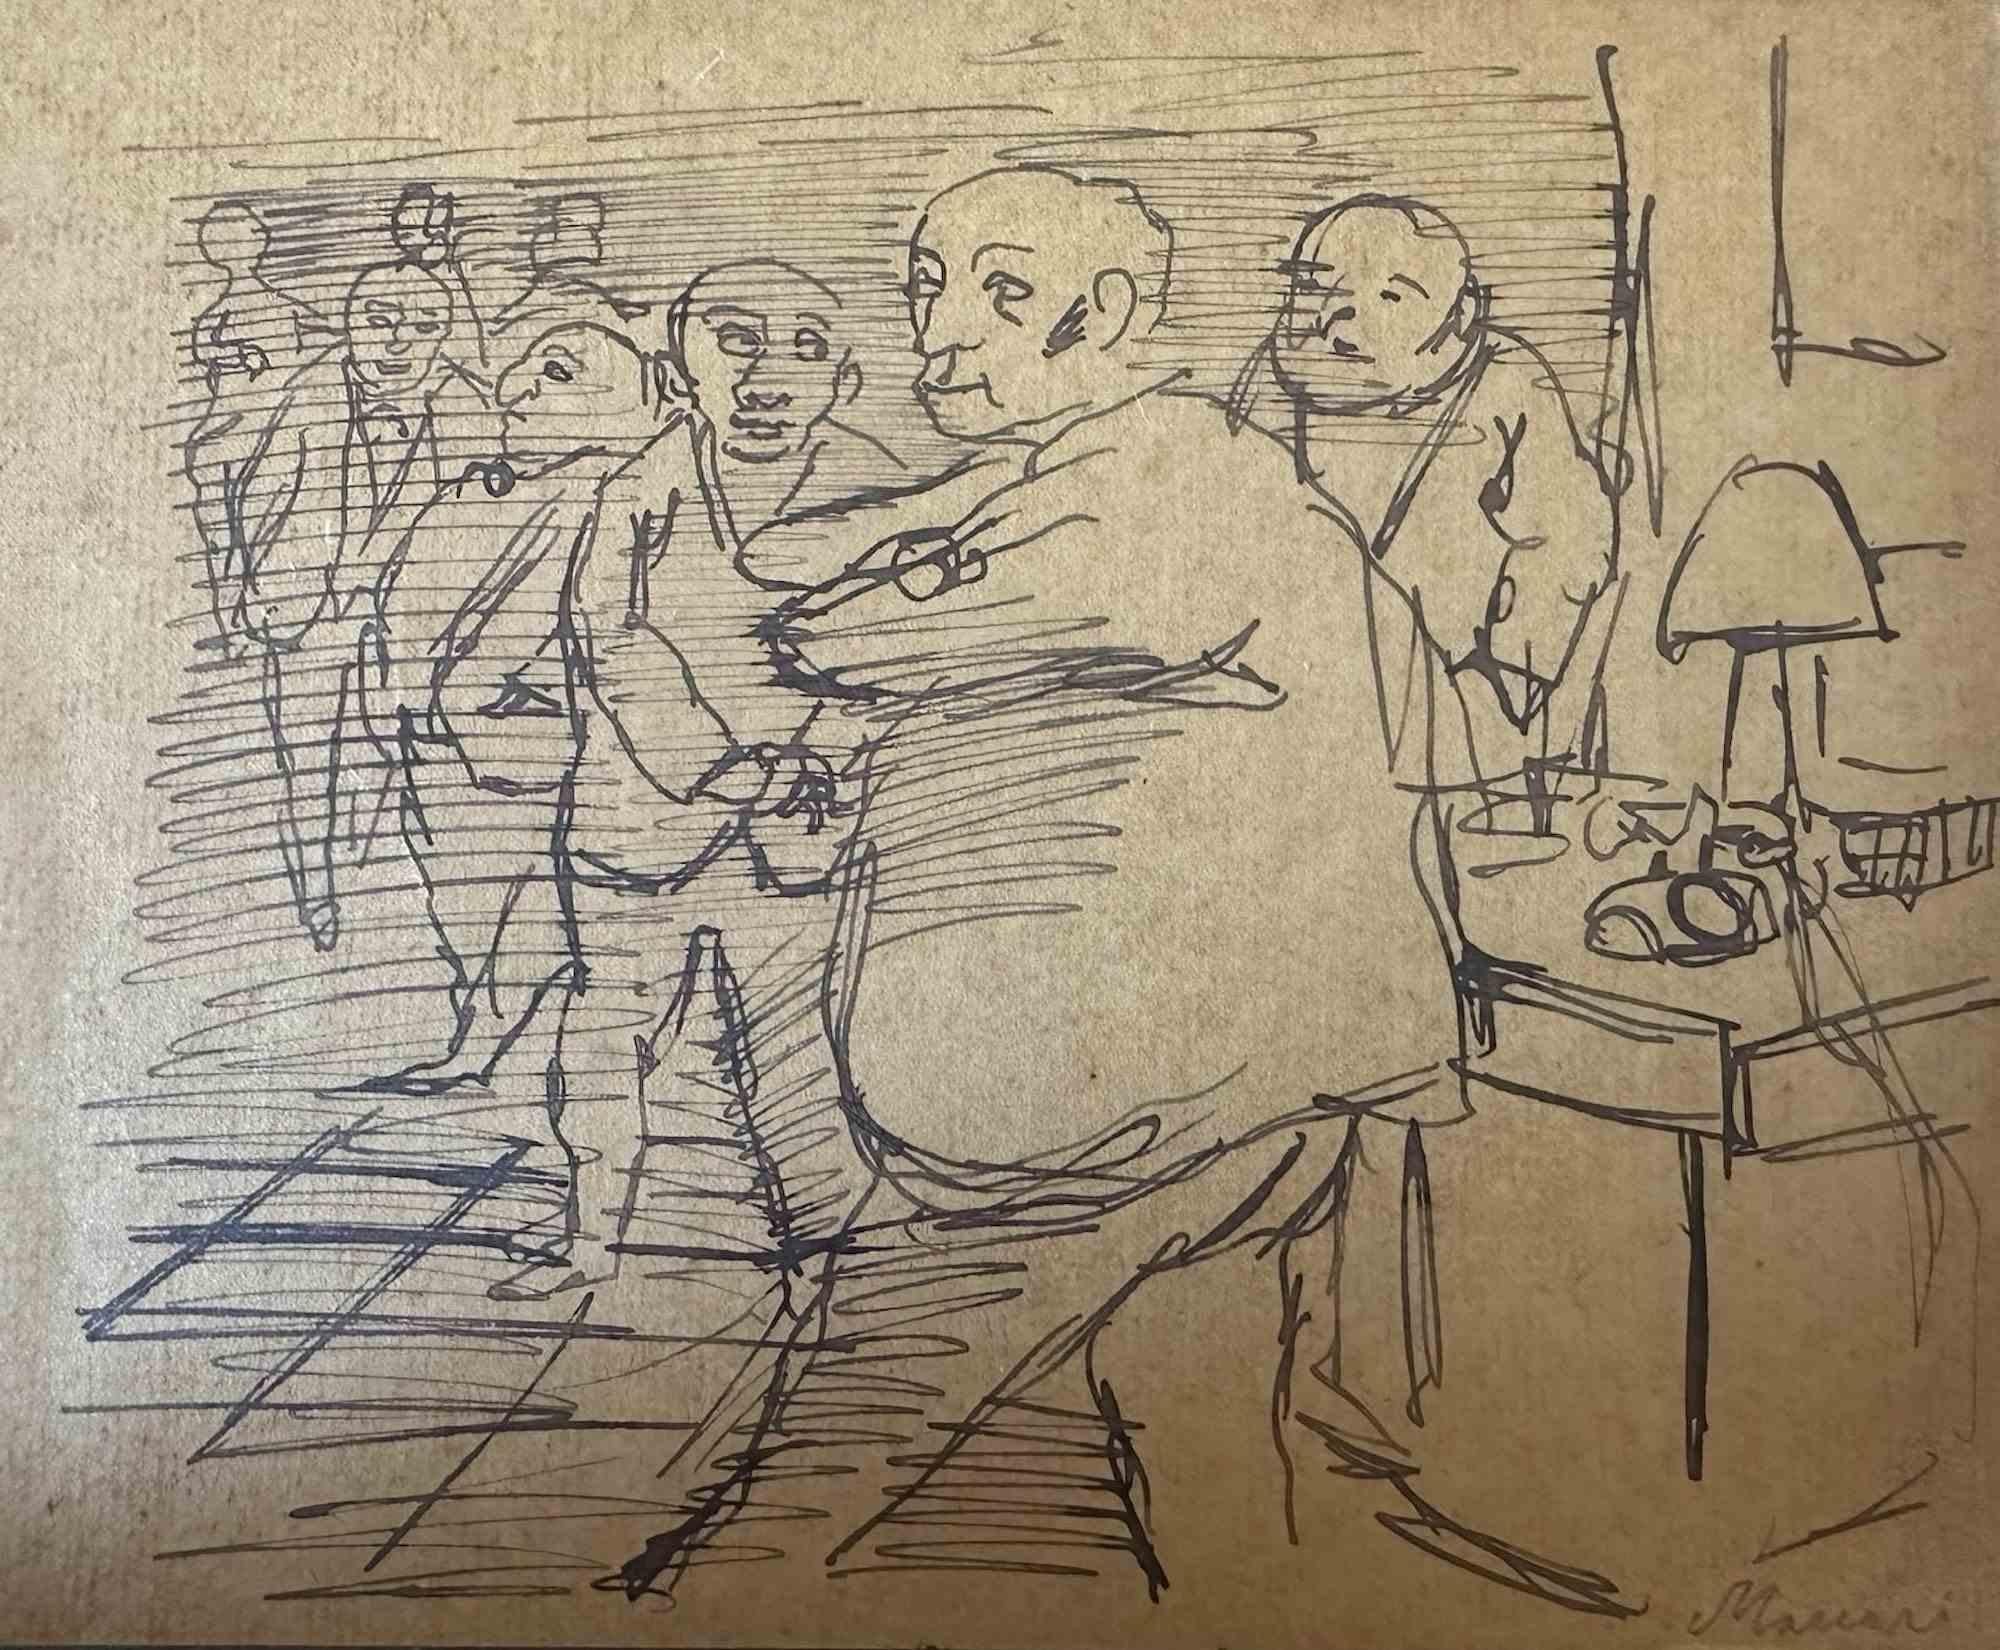 The Crowd is a Pen Drawing realized by Mino Maccari  (1924-1989) in the 1960s.

Hand-signed on the lower margin.

Good condition.

Mino Maccari (Siena, 1924-Rome, June 16, 1989) was an Italian writer, painter, engraver and journalist, winner of the